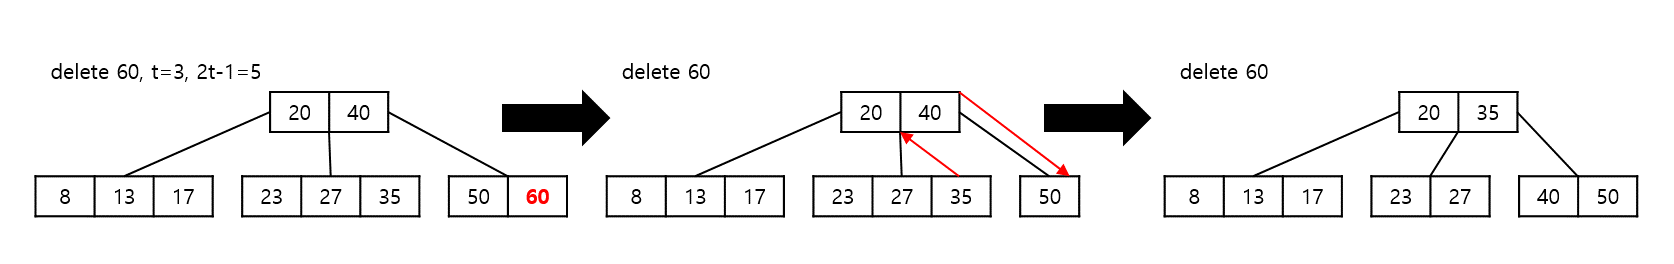 Data Structure_B-Tree_003.png